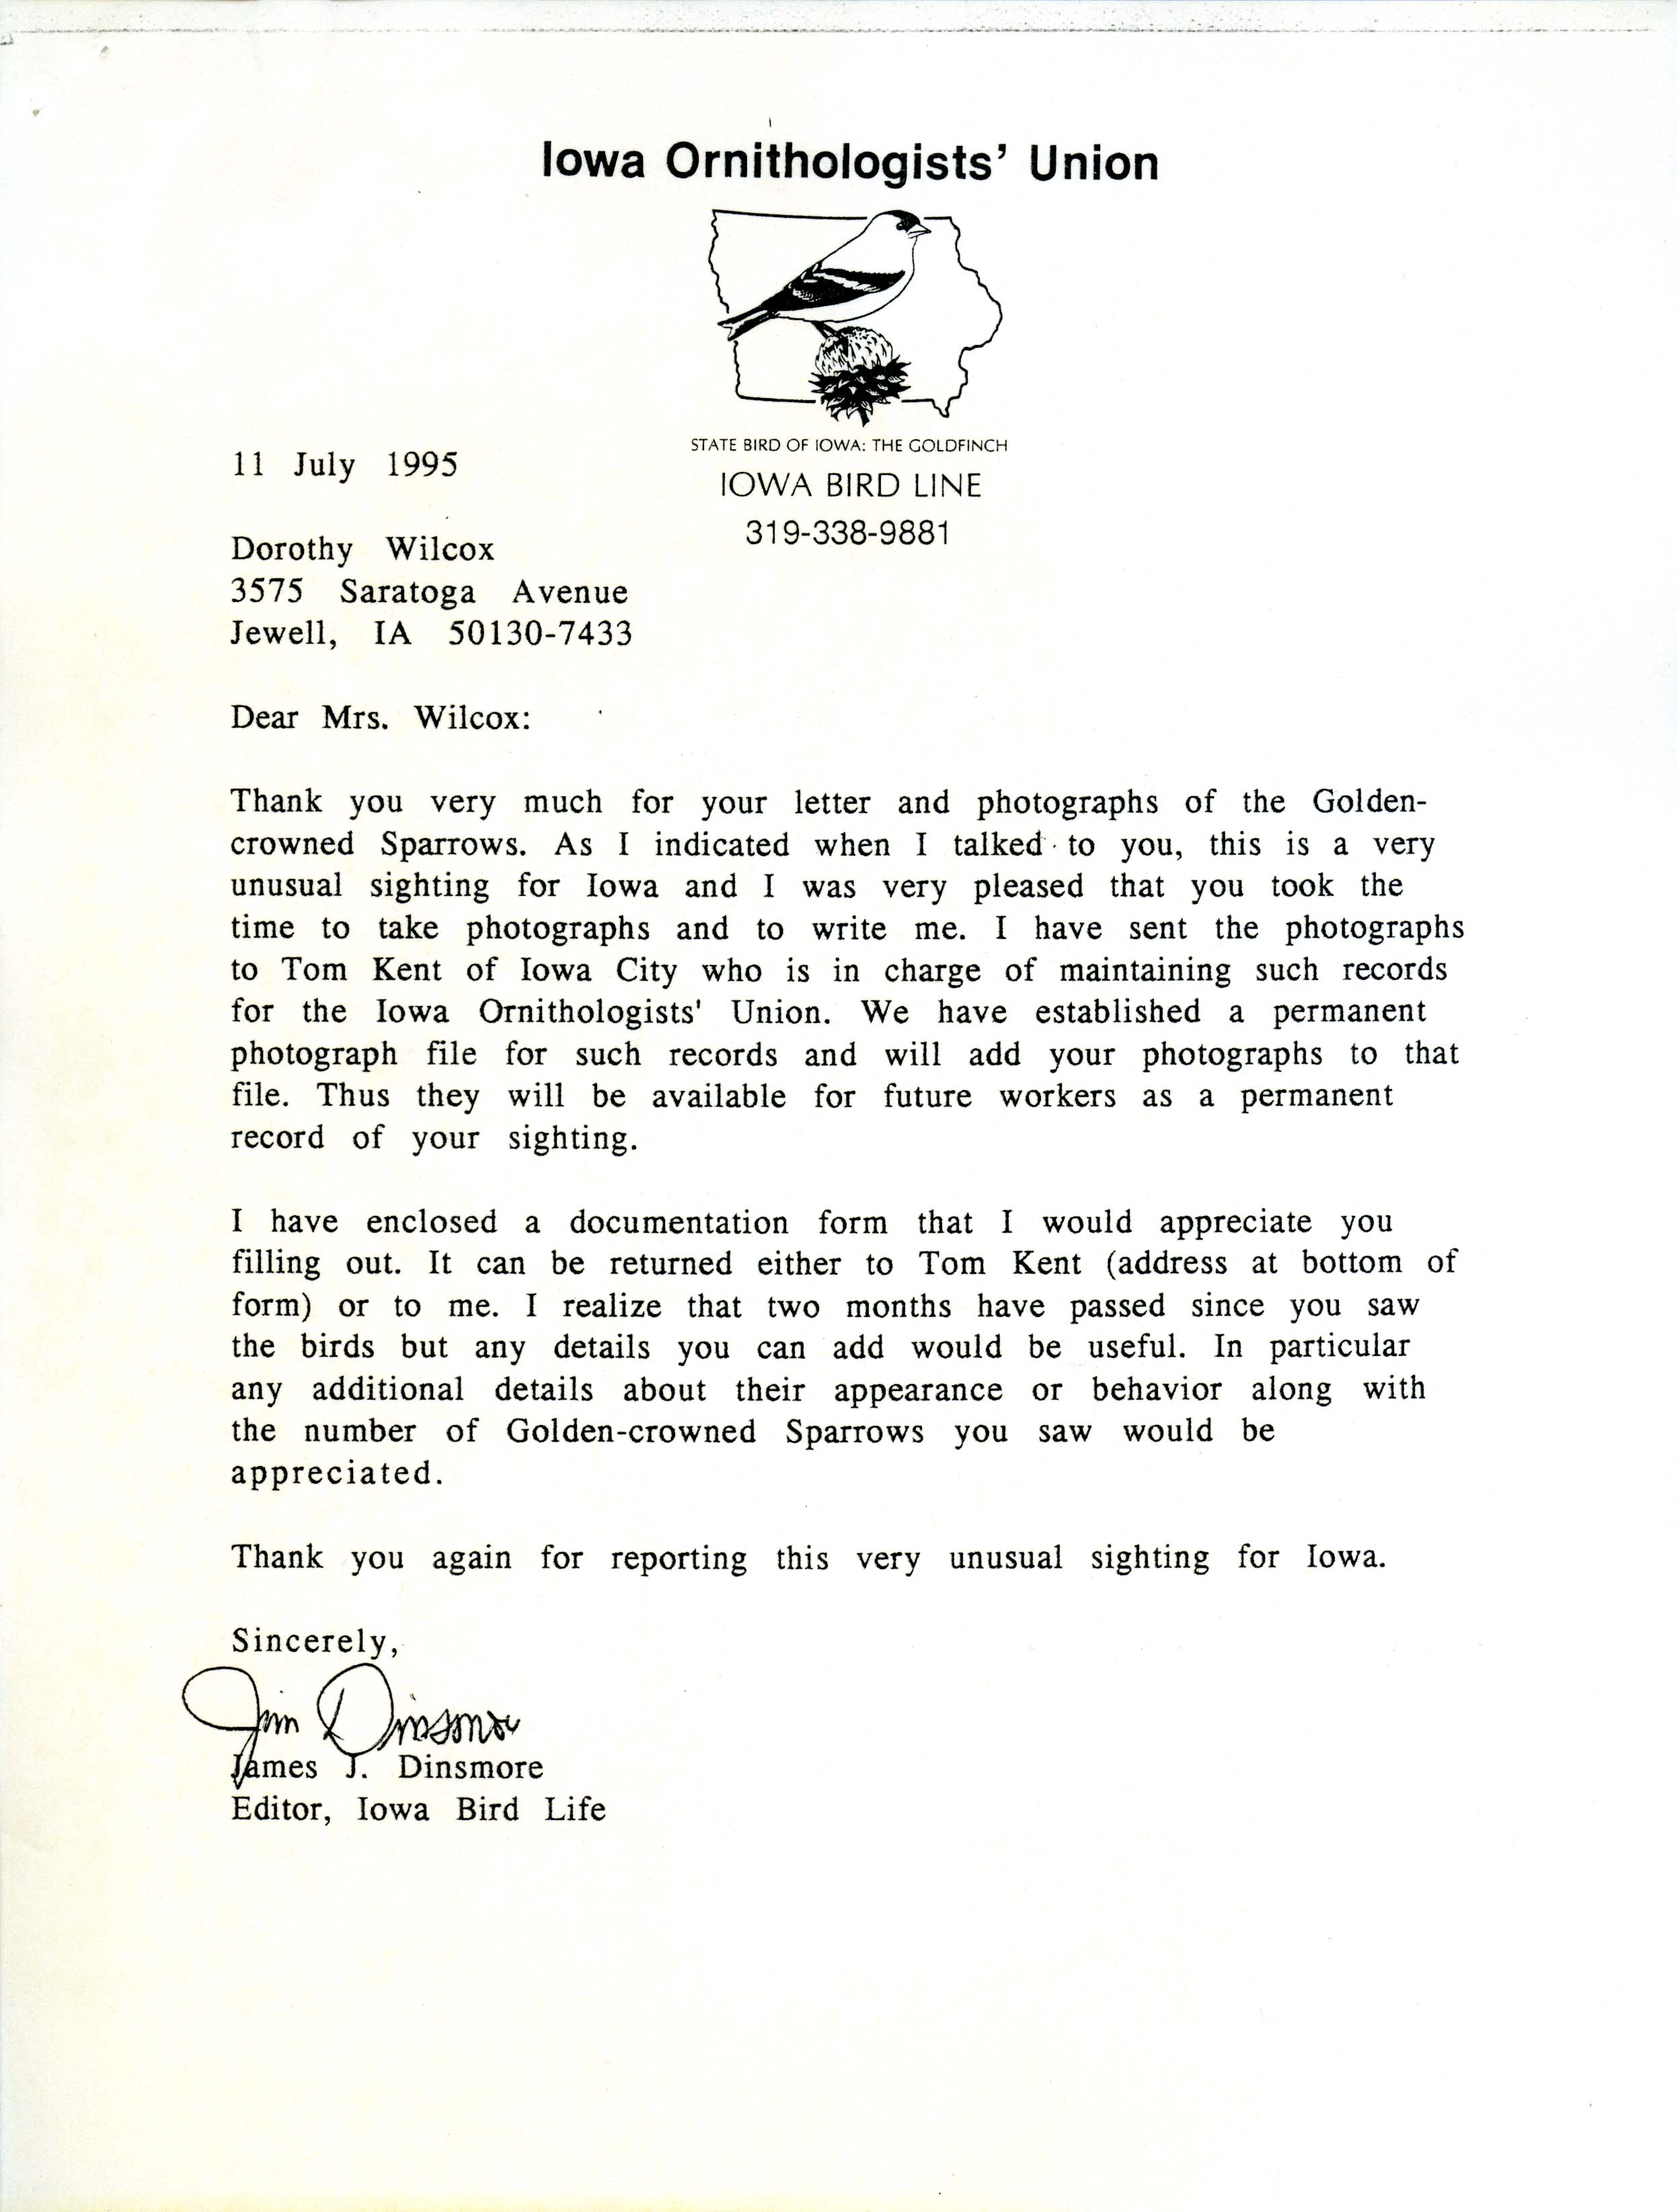 Jim Dinsmore letter to Dorothy Wilcox regarding Golden-crowned Sparrow photographs, July 11, 1995